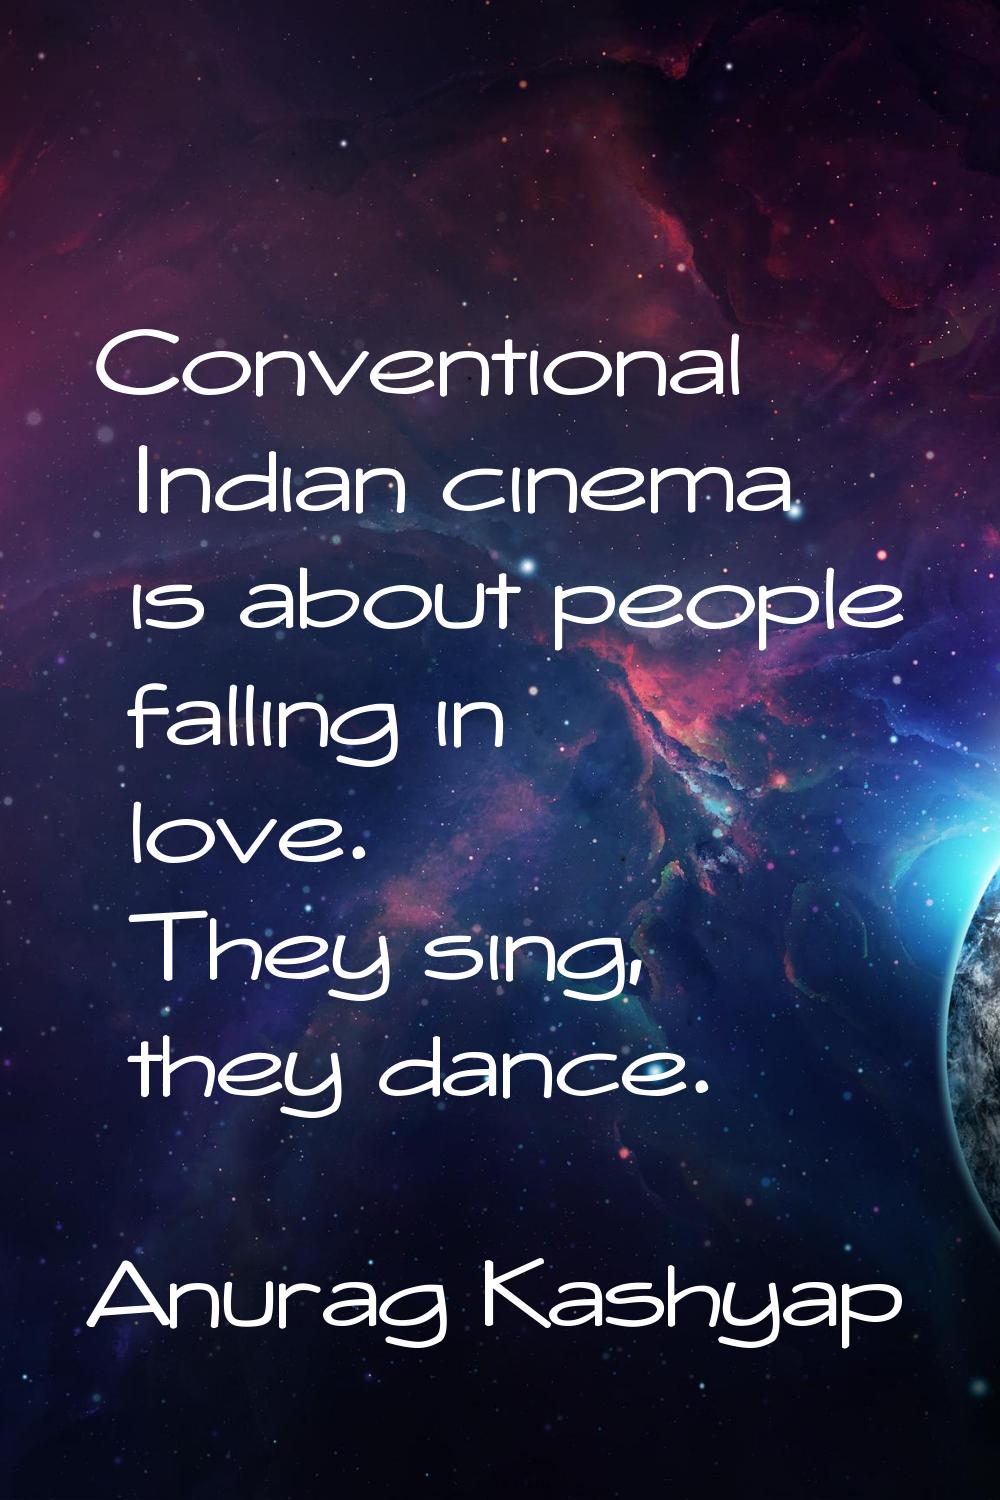 Conventional Indian cinema is about people falling in love. They sing, they dance.